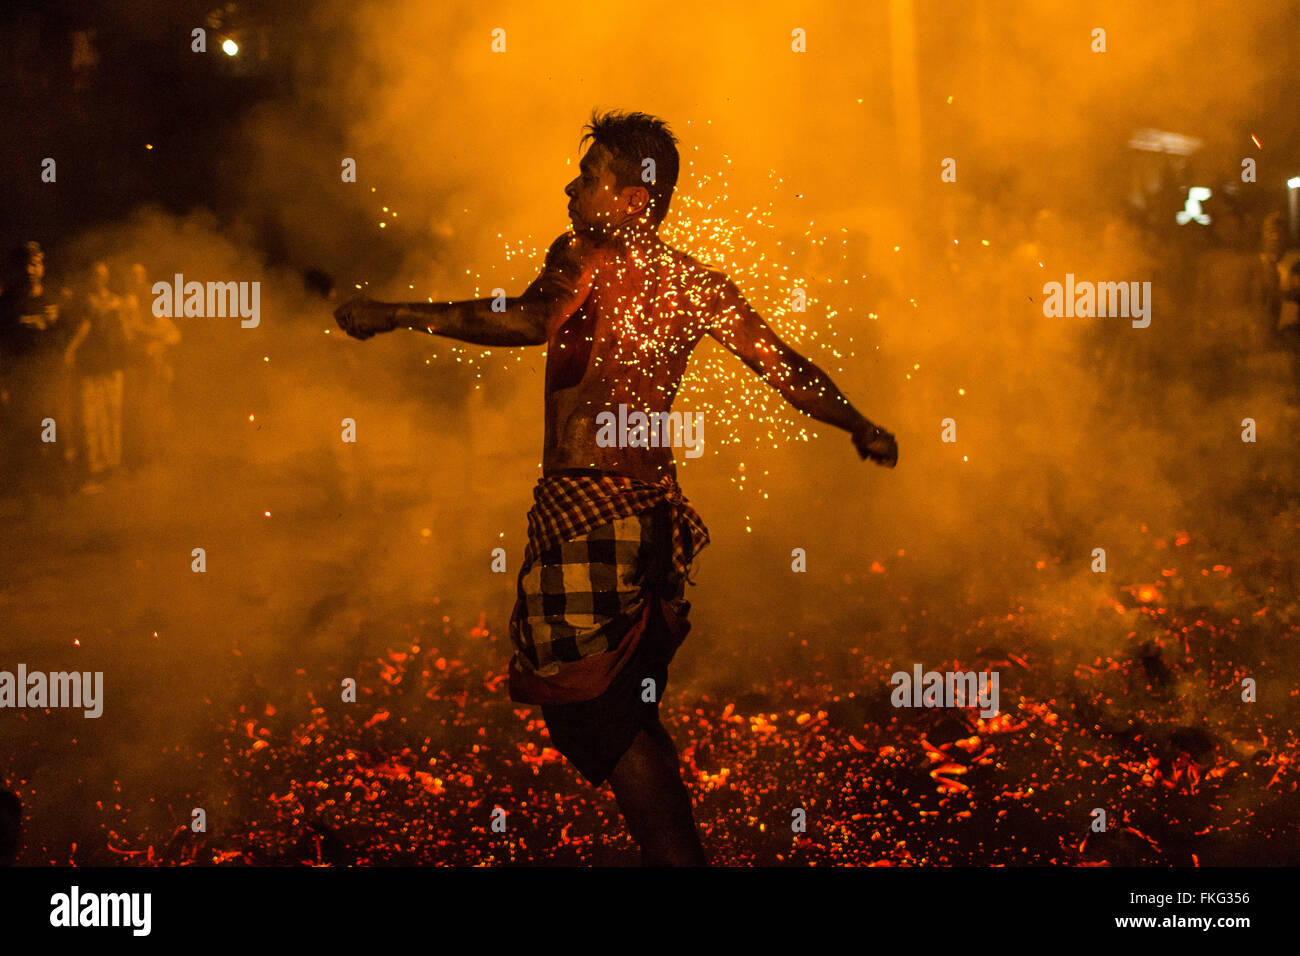 Bali, Indonesia. 08th Mar, 2016. A Balinese man gestures as he prepare to throw the fire during the 'Mesabatan Api' ritual a head of Nyepi Day on March, 2016 at Banjar Nagi in Gianyar, Bali, Indonesia. Mesabatan Api is held annually a day before the Nyepi Day of Silence, as symbolizes the purification of universe and human body trough fire. Nyepi is a Hindu celebration observed every new year according to the Balinese calendar. Credit:  Agung Parameswara/Alamy Live News Stock Photo